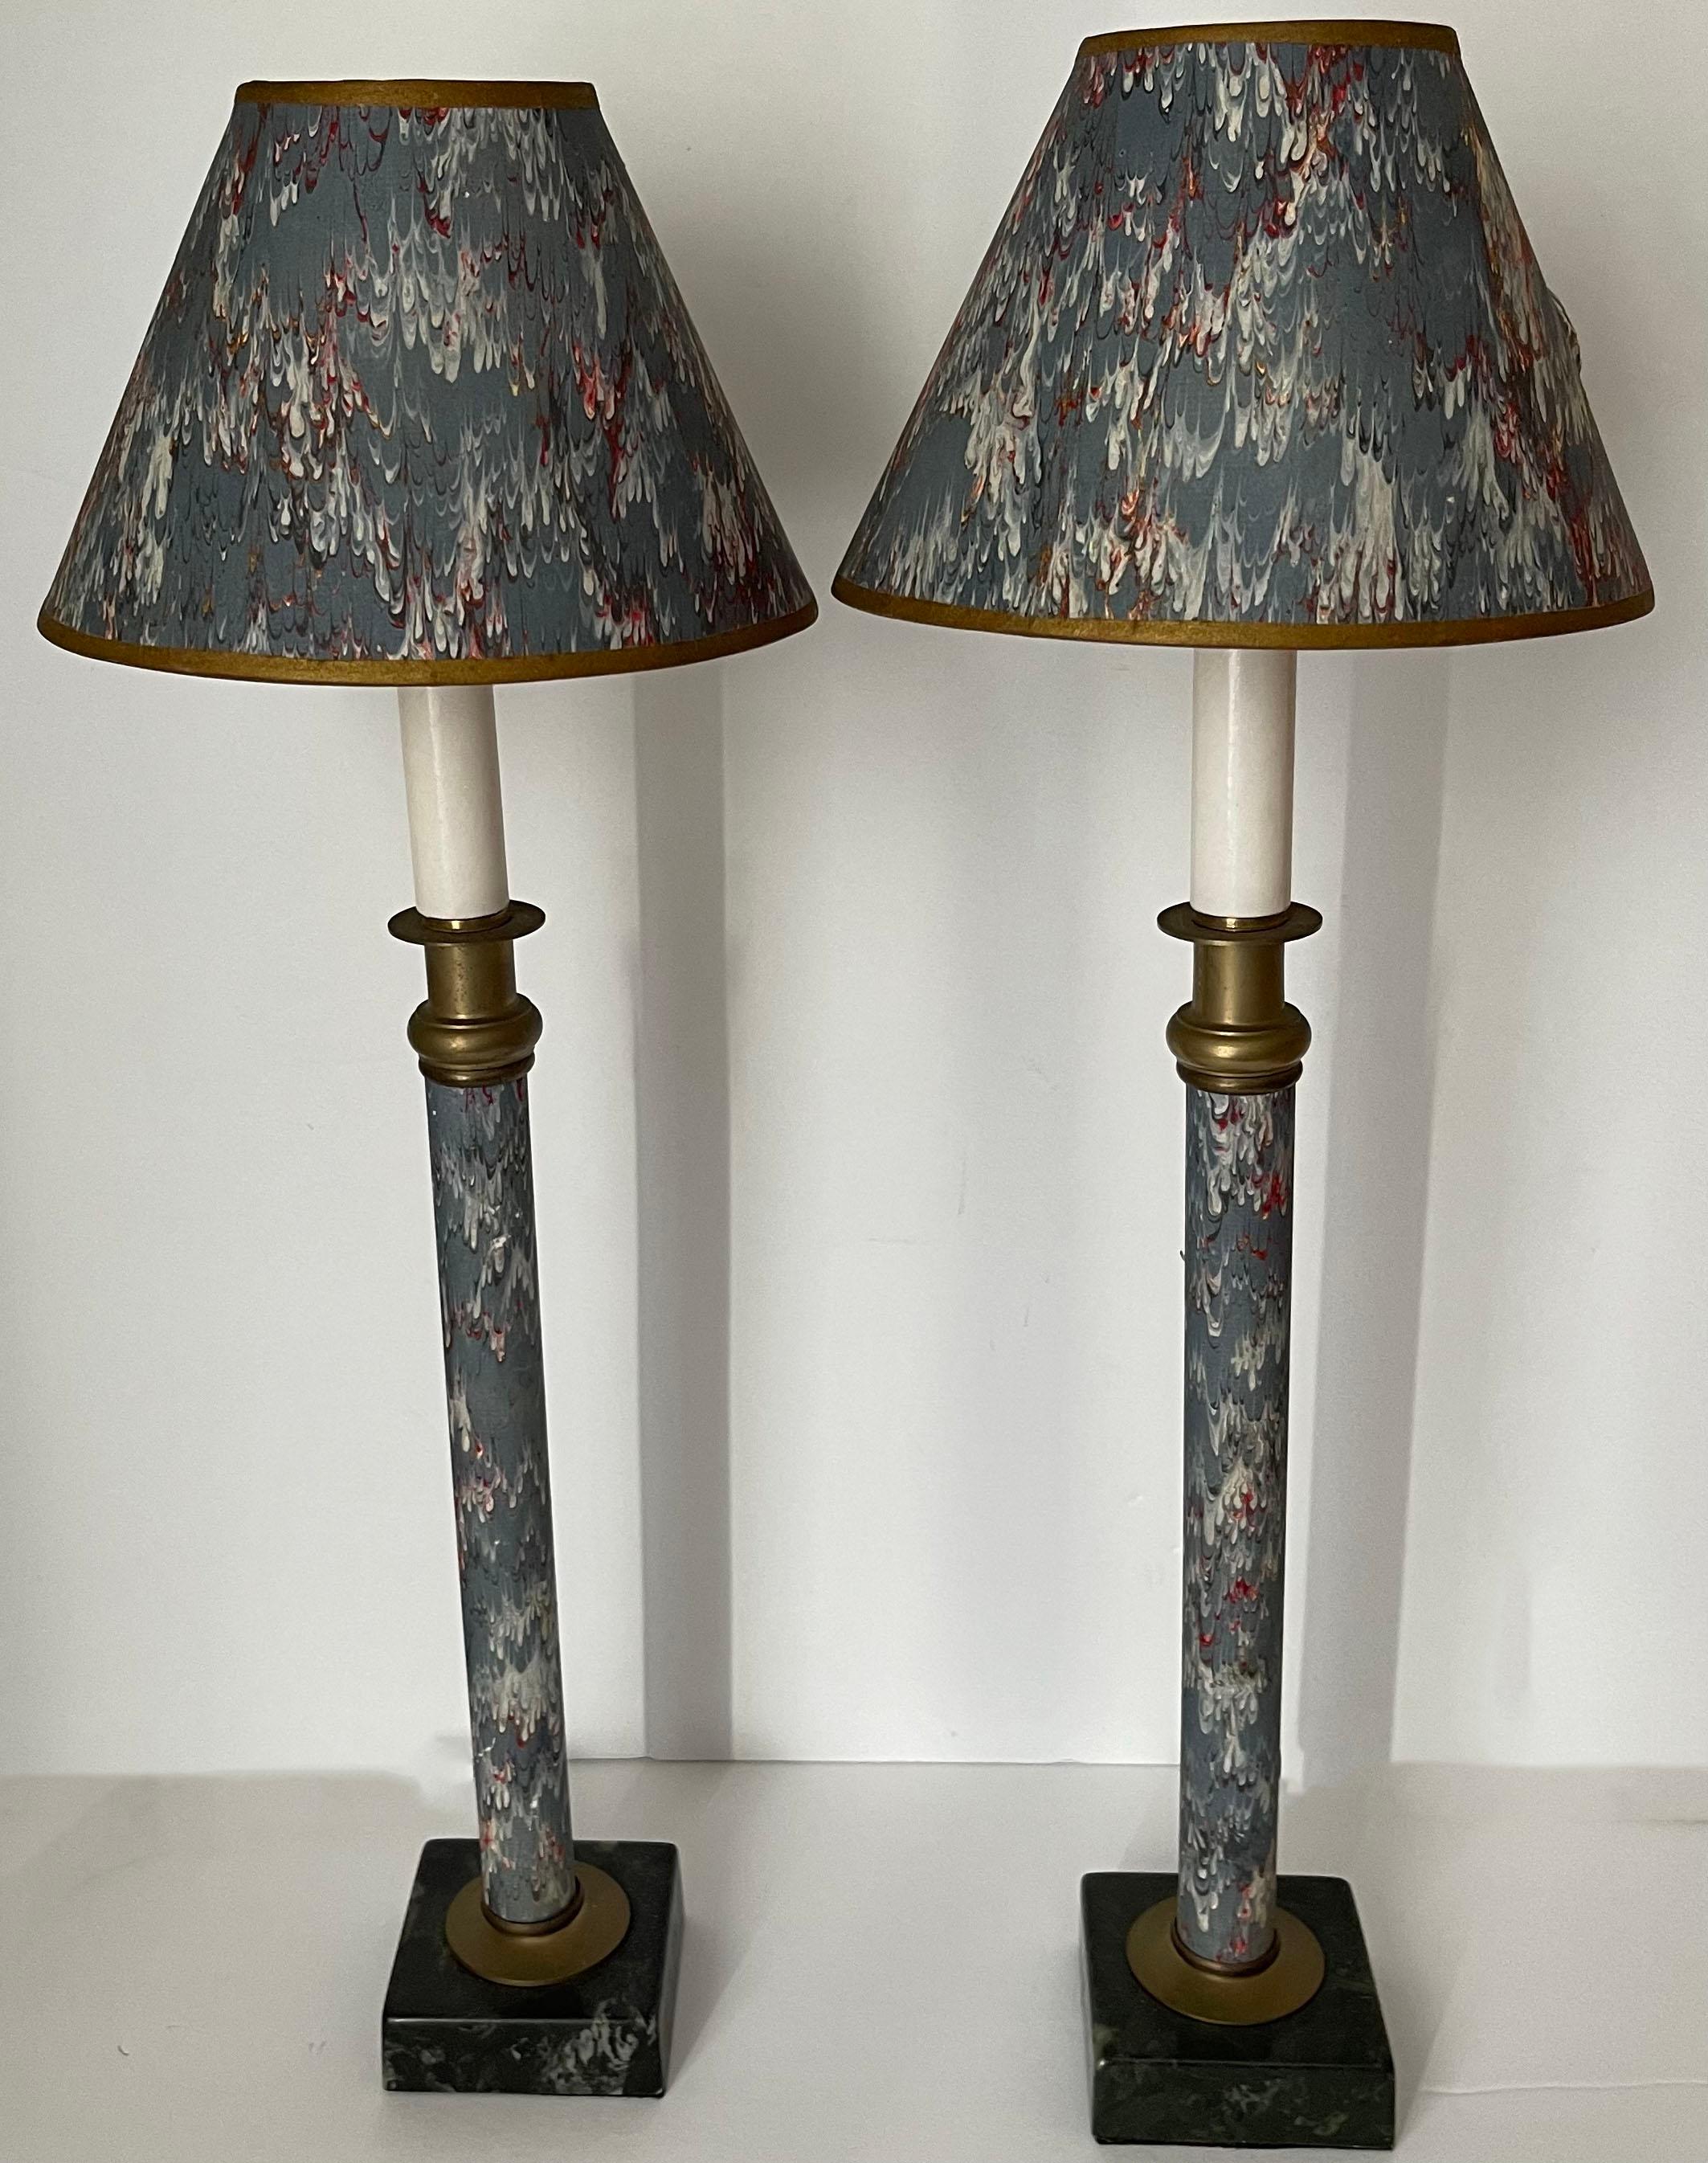 Pair of blue marbleized paper candlestick lamps. Black square marble base. As found, original matching paper clip on lampshades are included. Newly rewired with clear cords and side on/off switches.
Each lamp takes one chandelier bulb max 60 watts